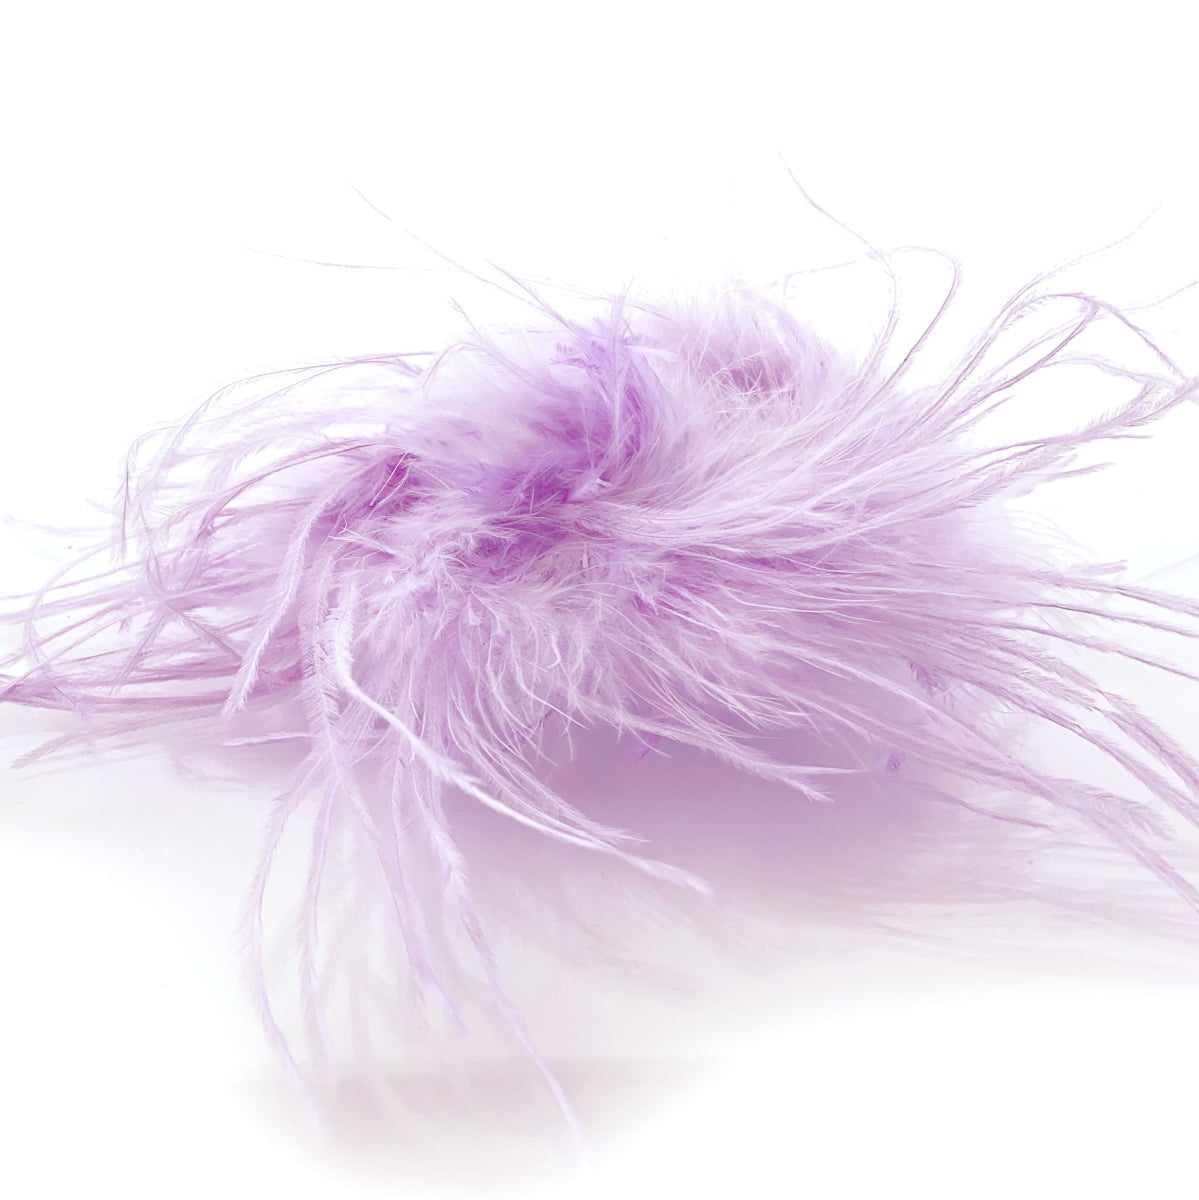 ostrich feather boa 6 ply [ostrich feather boa Light Purple] - $150.00 :  eeagal Trimming!